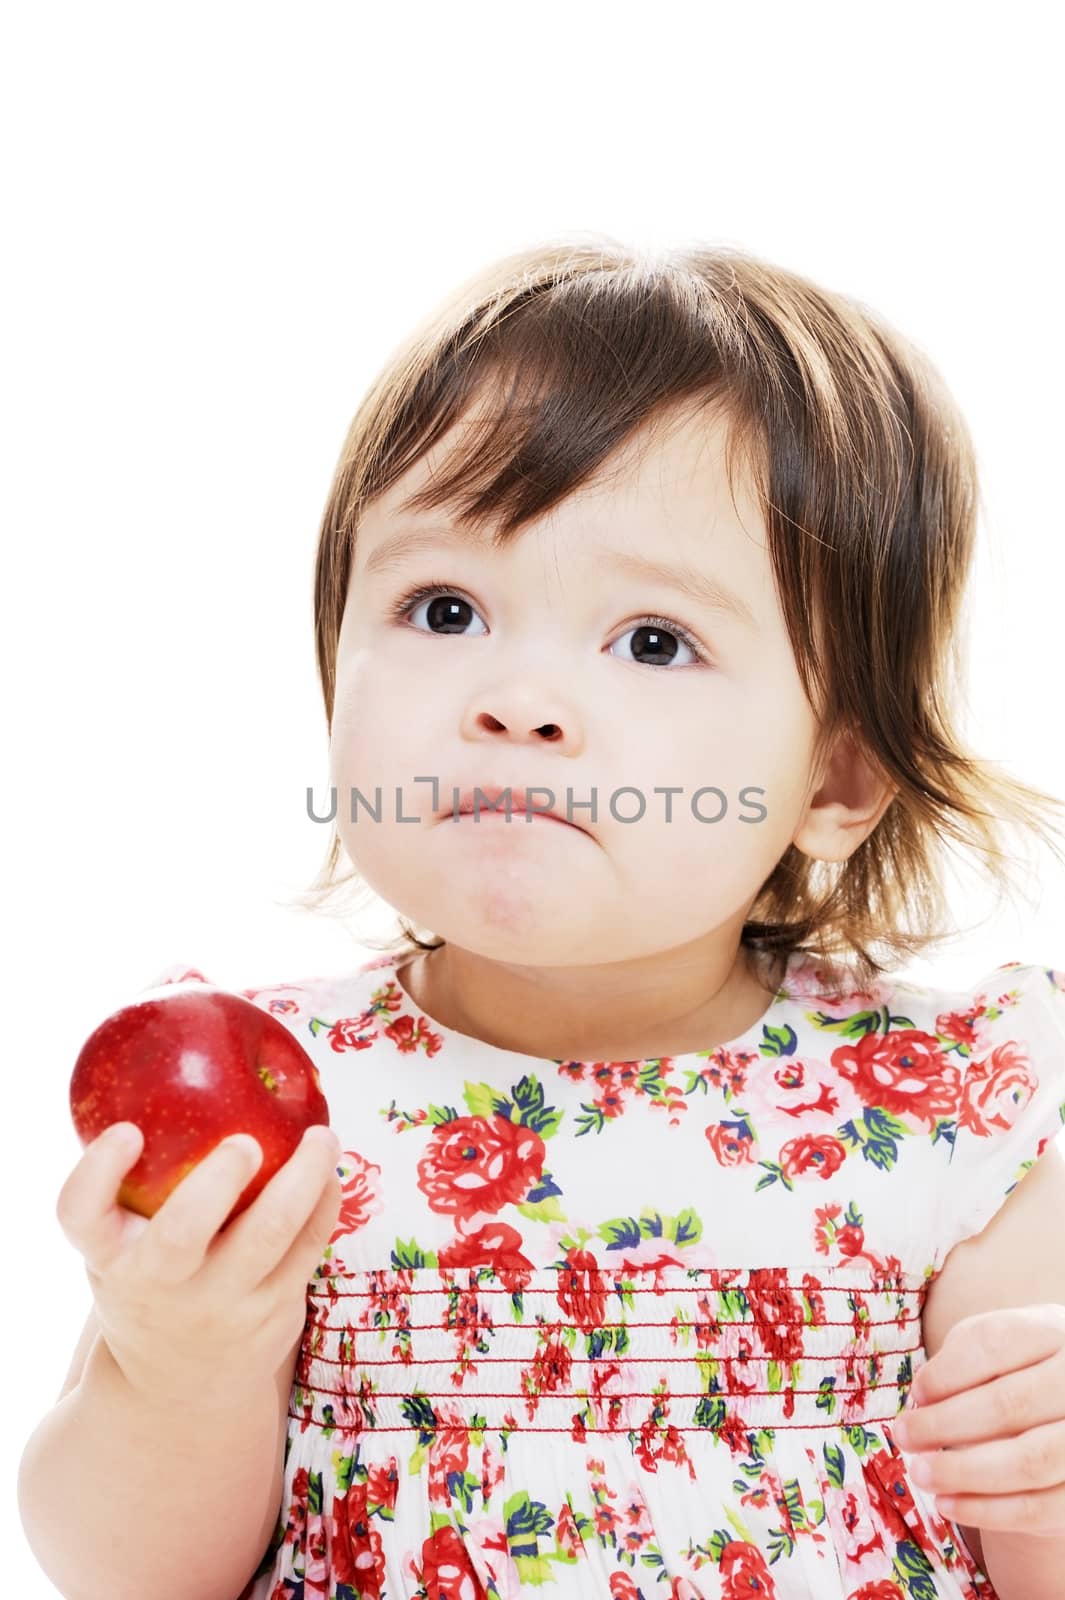 Baby girl tasting a red fresh red apple